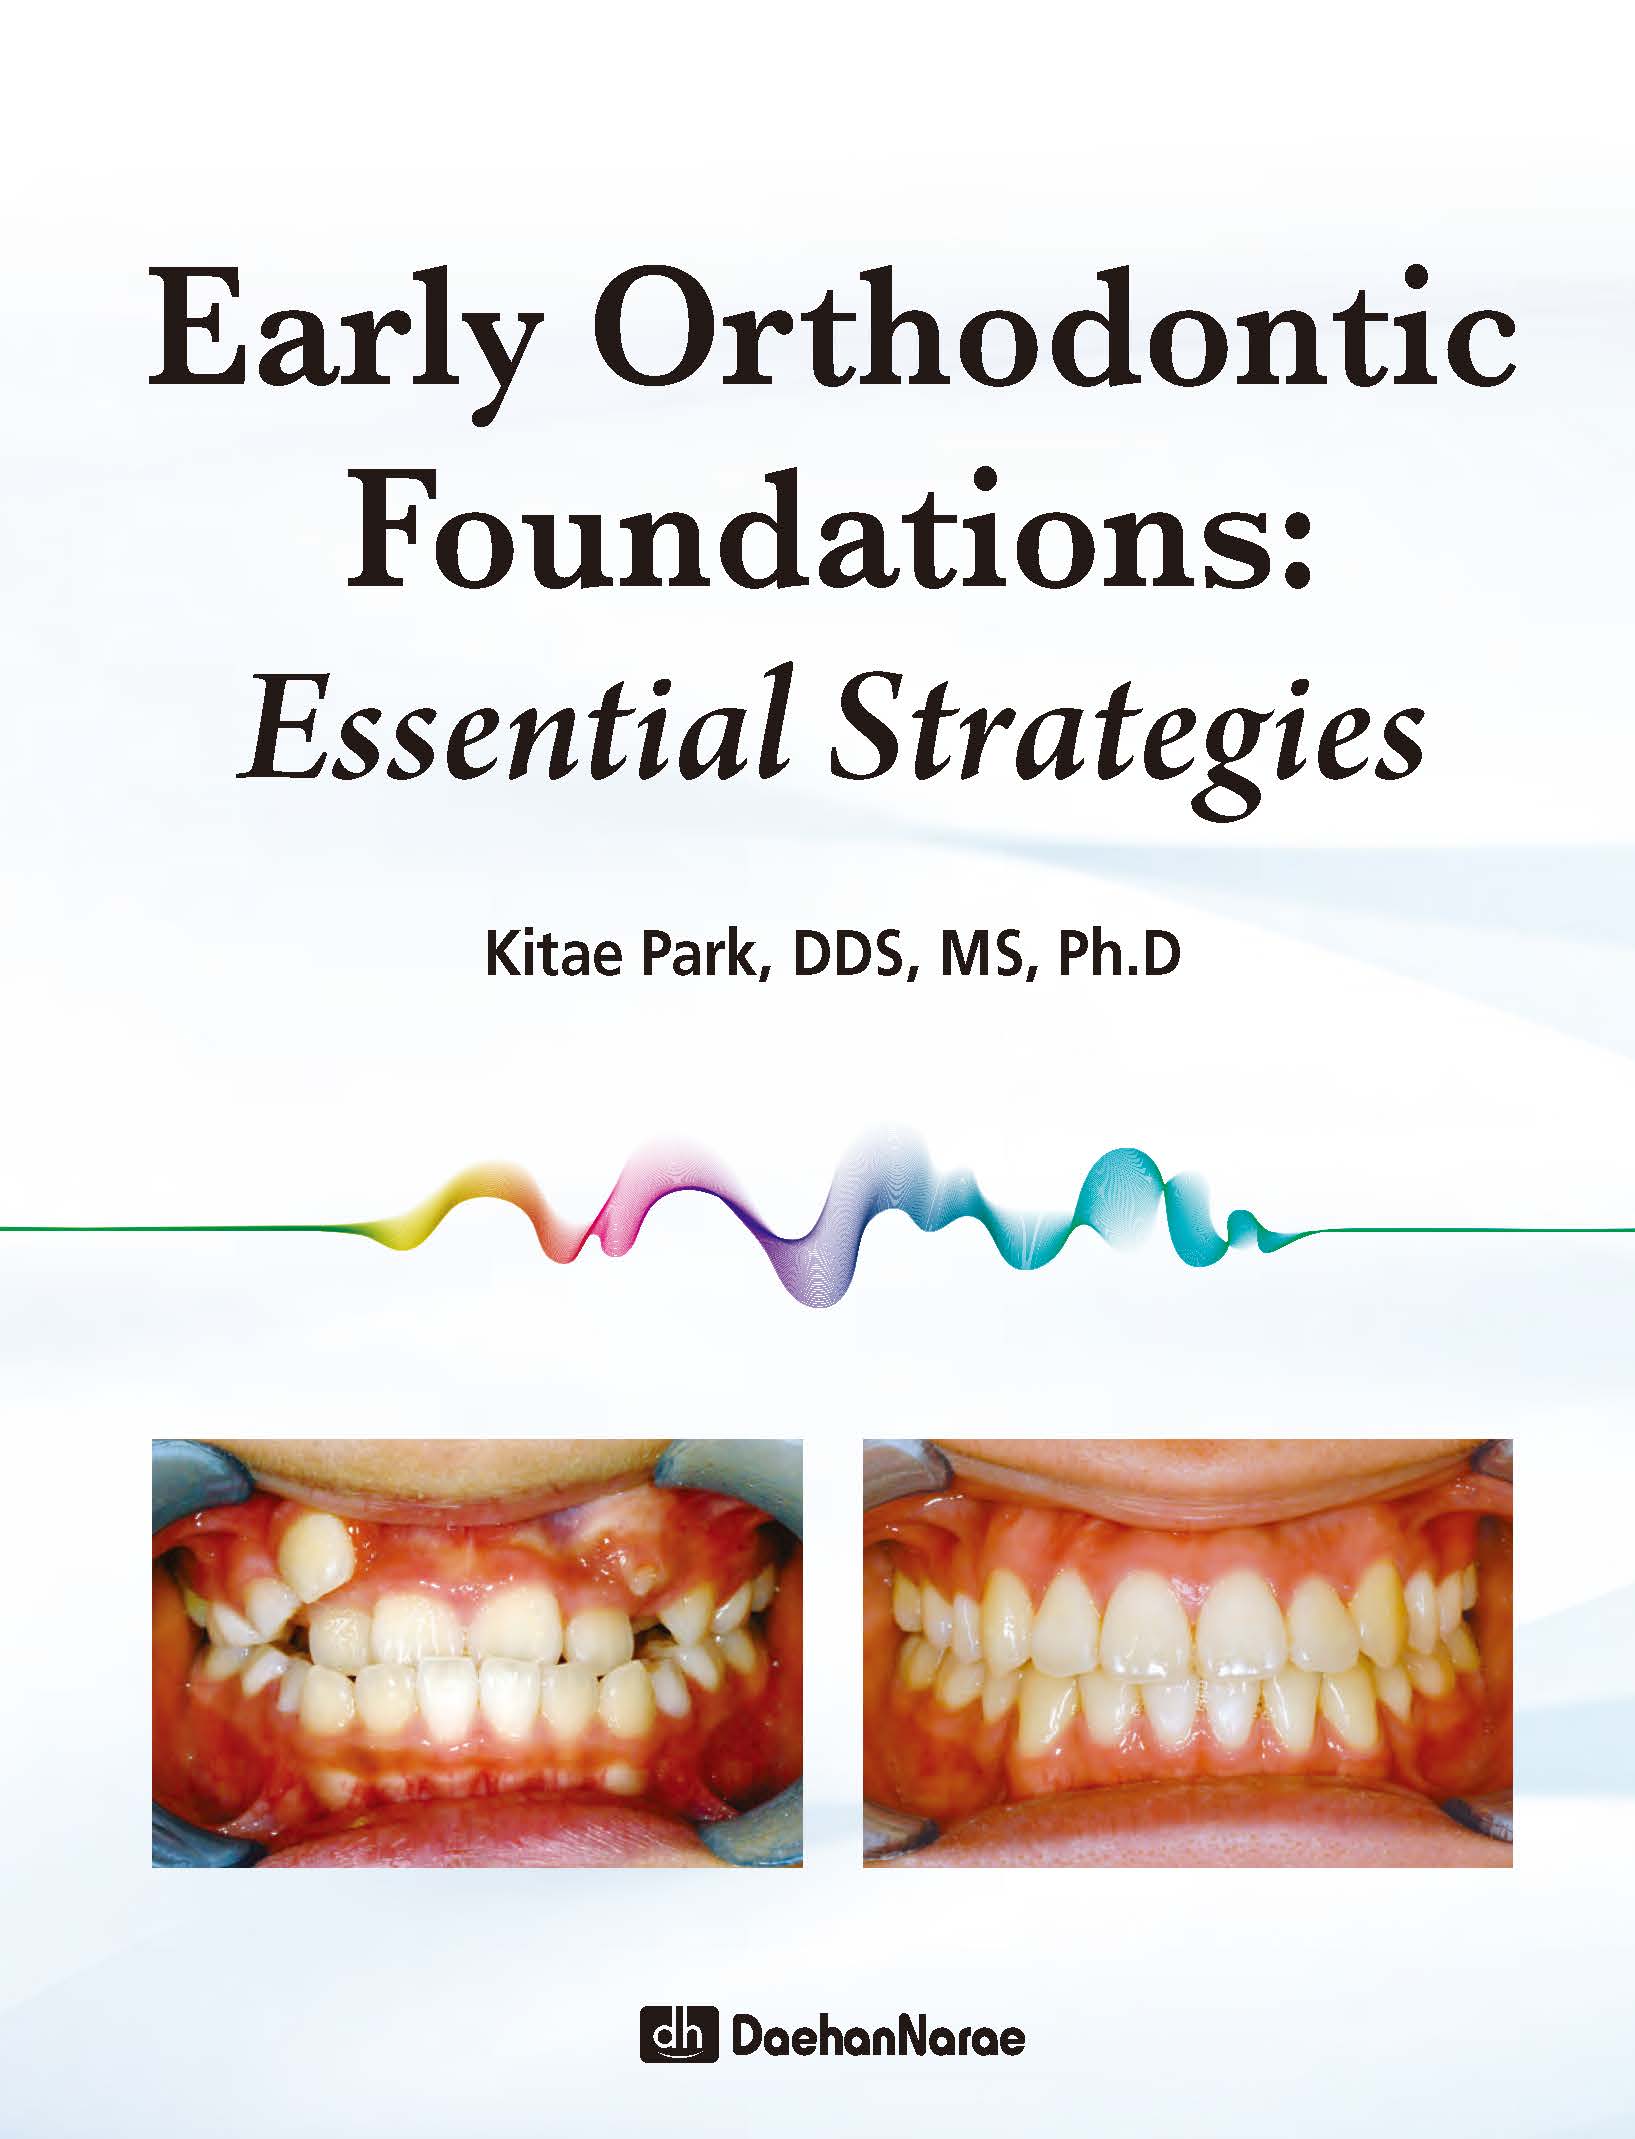 Early Orthodontic Foundations: Essential Strategies